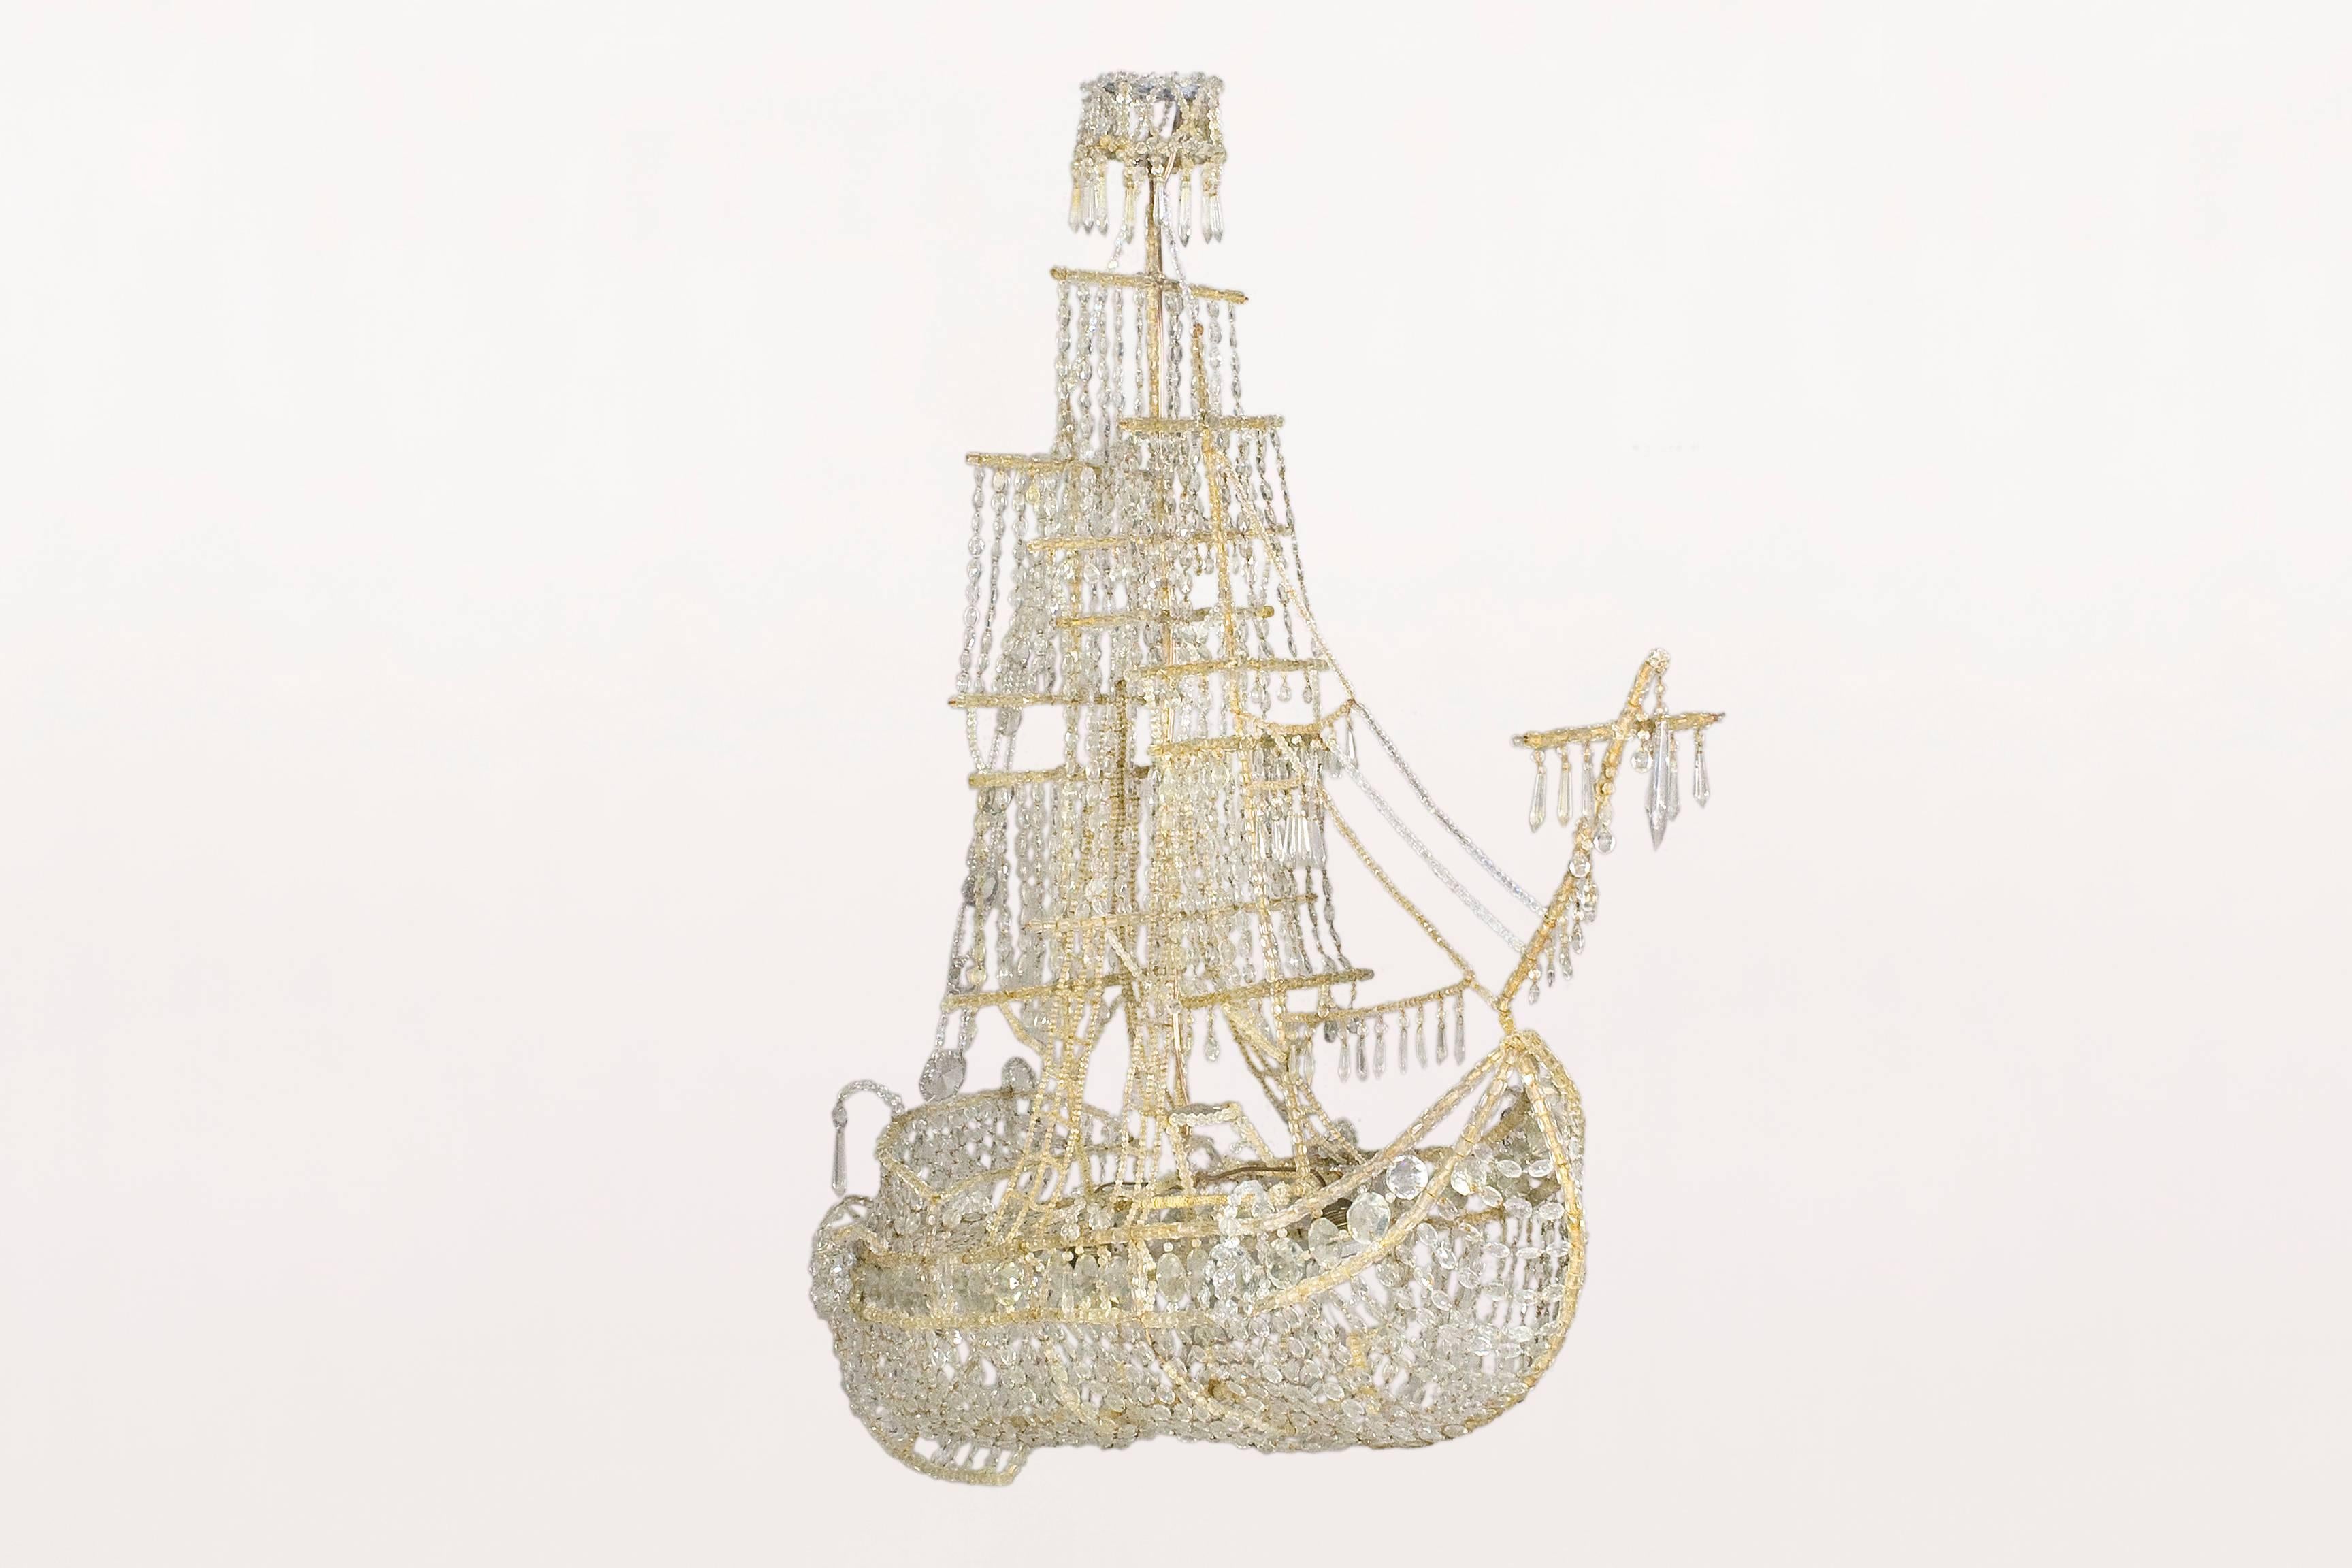 Large Crystal Galleon Chandelier
Two Light Sources
Recently Rewired
Circa 1940, Spain
Good Vintage Condition